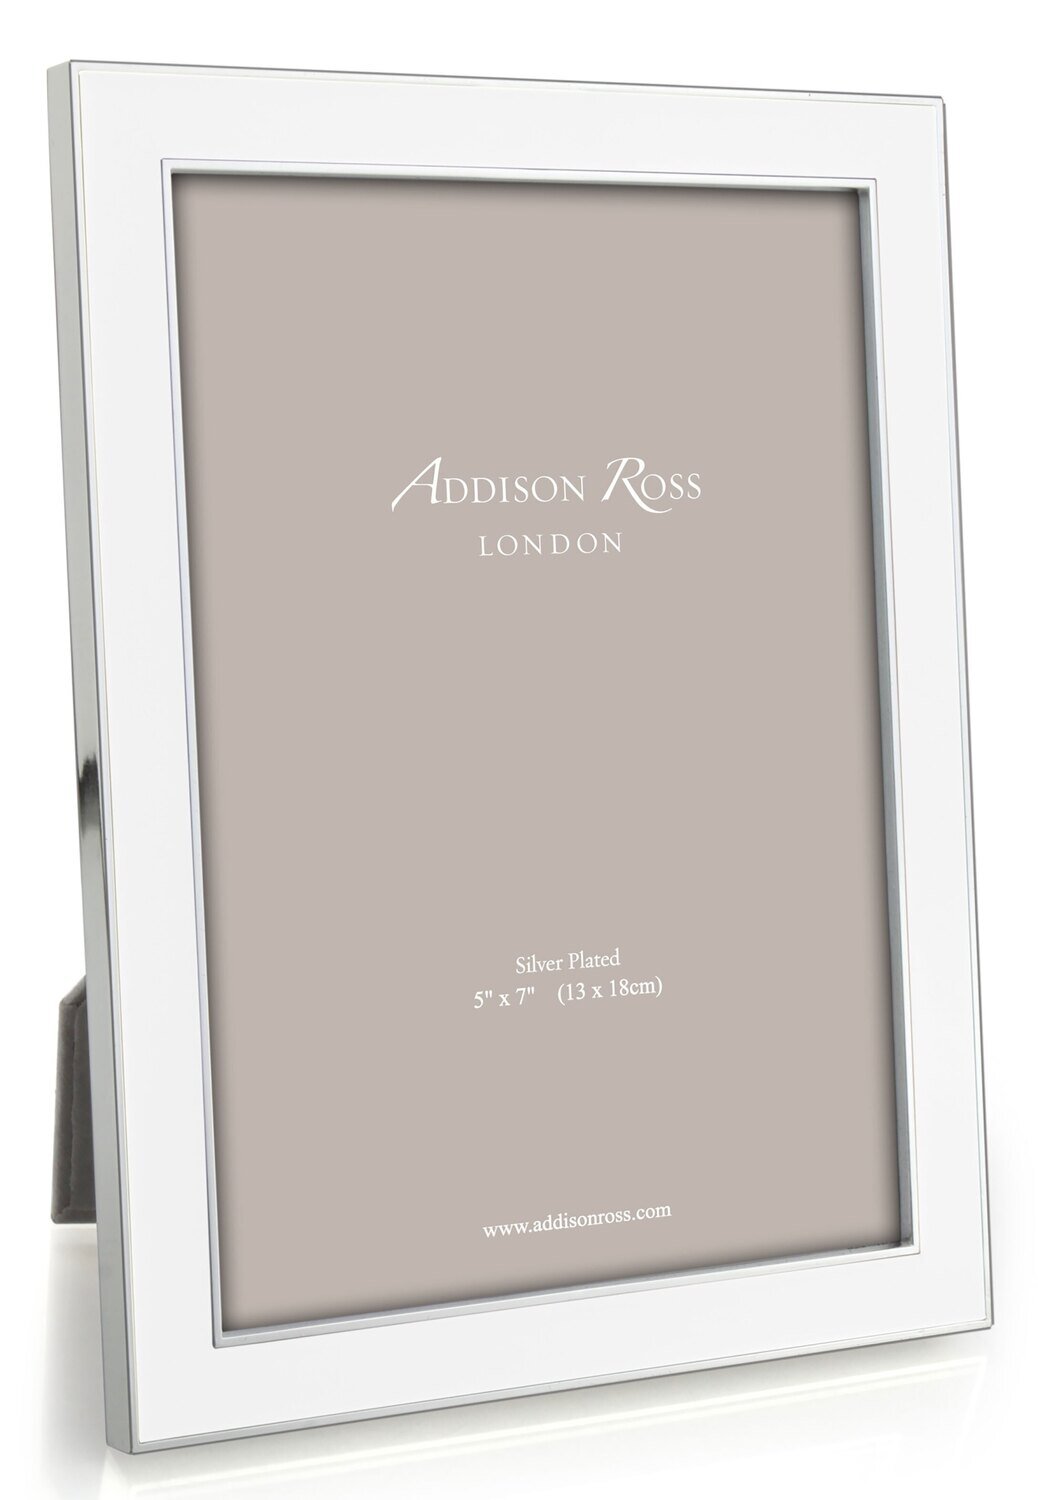 Addison Ross White Enamel Picture Frame 5 x 7 Inch Silver-plated FR0642